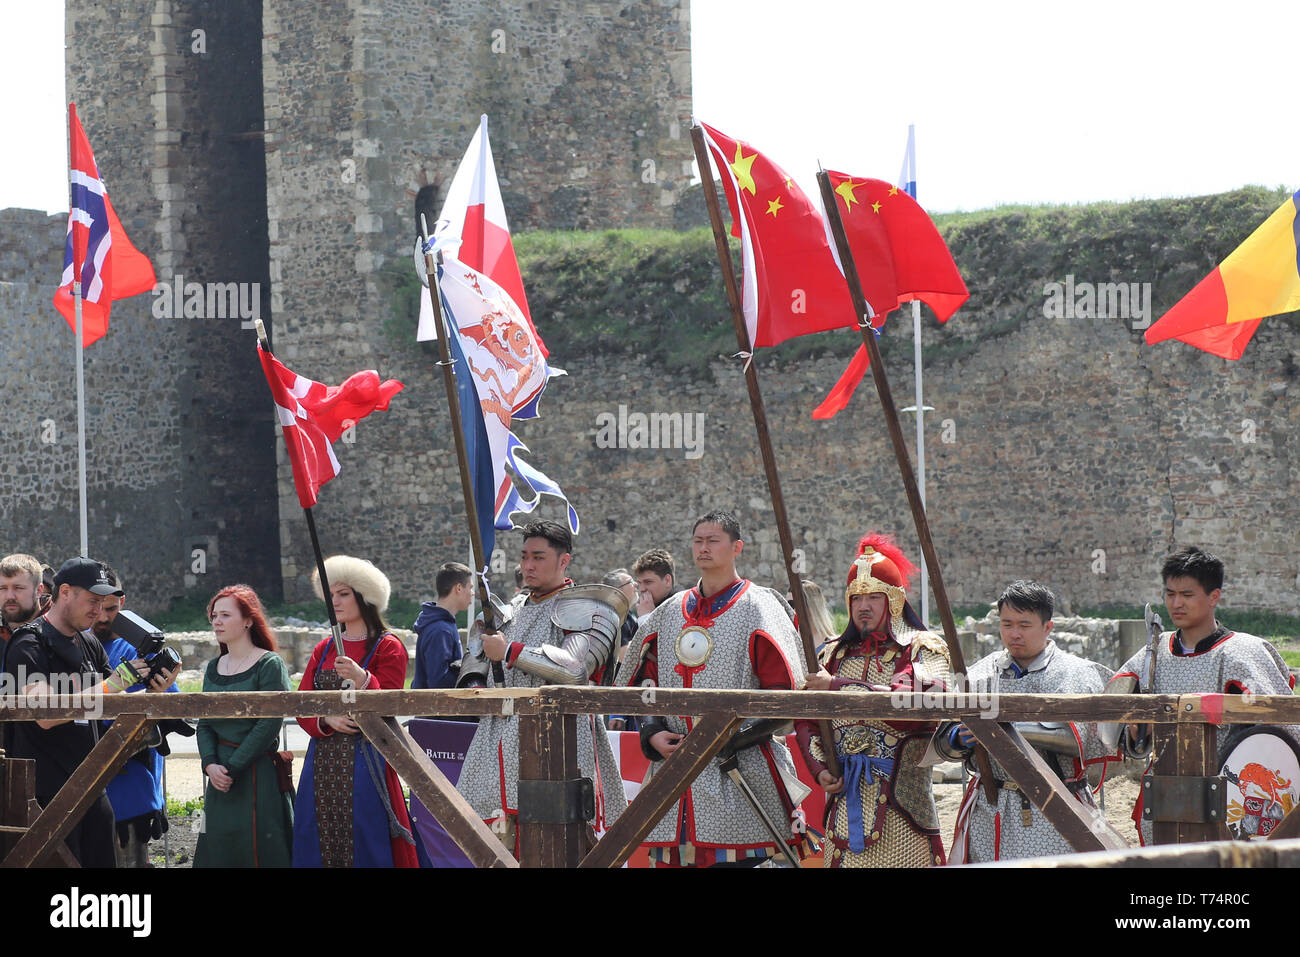 Smederevo. 2nd May, 2019. Chinese team members stand at the opening of the 10th World National HMB (Historic Medieval Battle) Championship in Smederevo, Serbia on May 2, 2019. Fighters from 40 countries gathered in the Serbian city of Smederevo for an unusual international tournament that recreates historic battle techniques-the World National HMB Championship. The Chinese team is made up of 27 members, and it is China's third appearance at the event. Credit: Nemanja Cabric/Xinhua/Alamy Live News Stock Photo